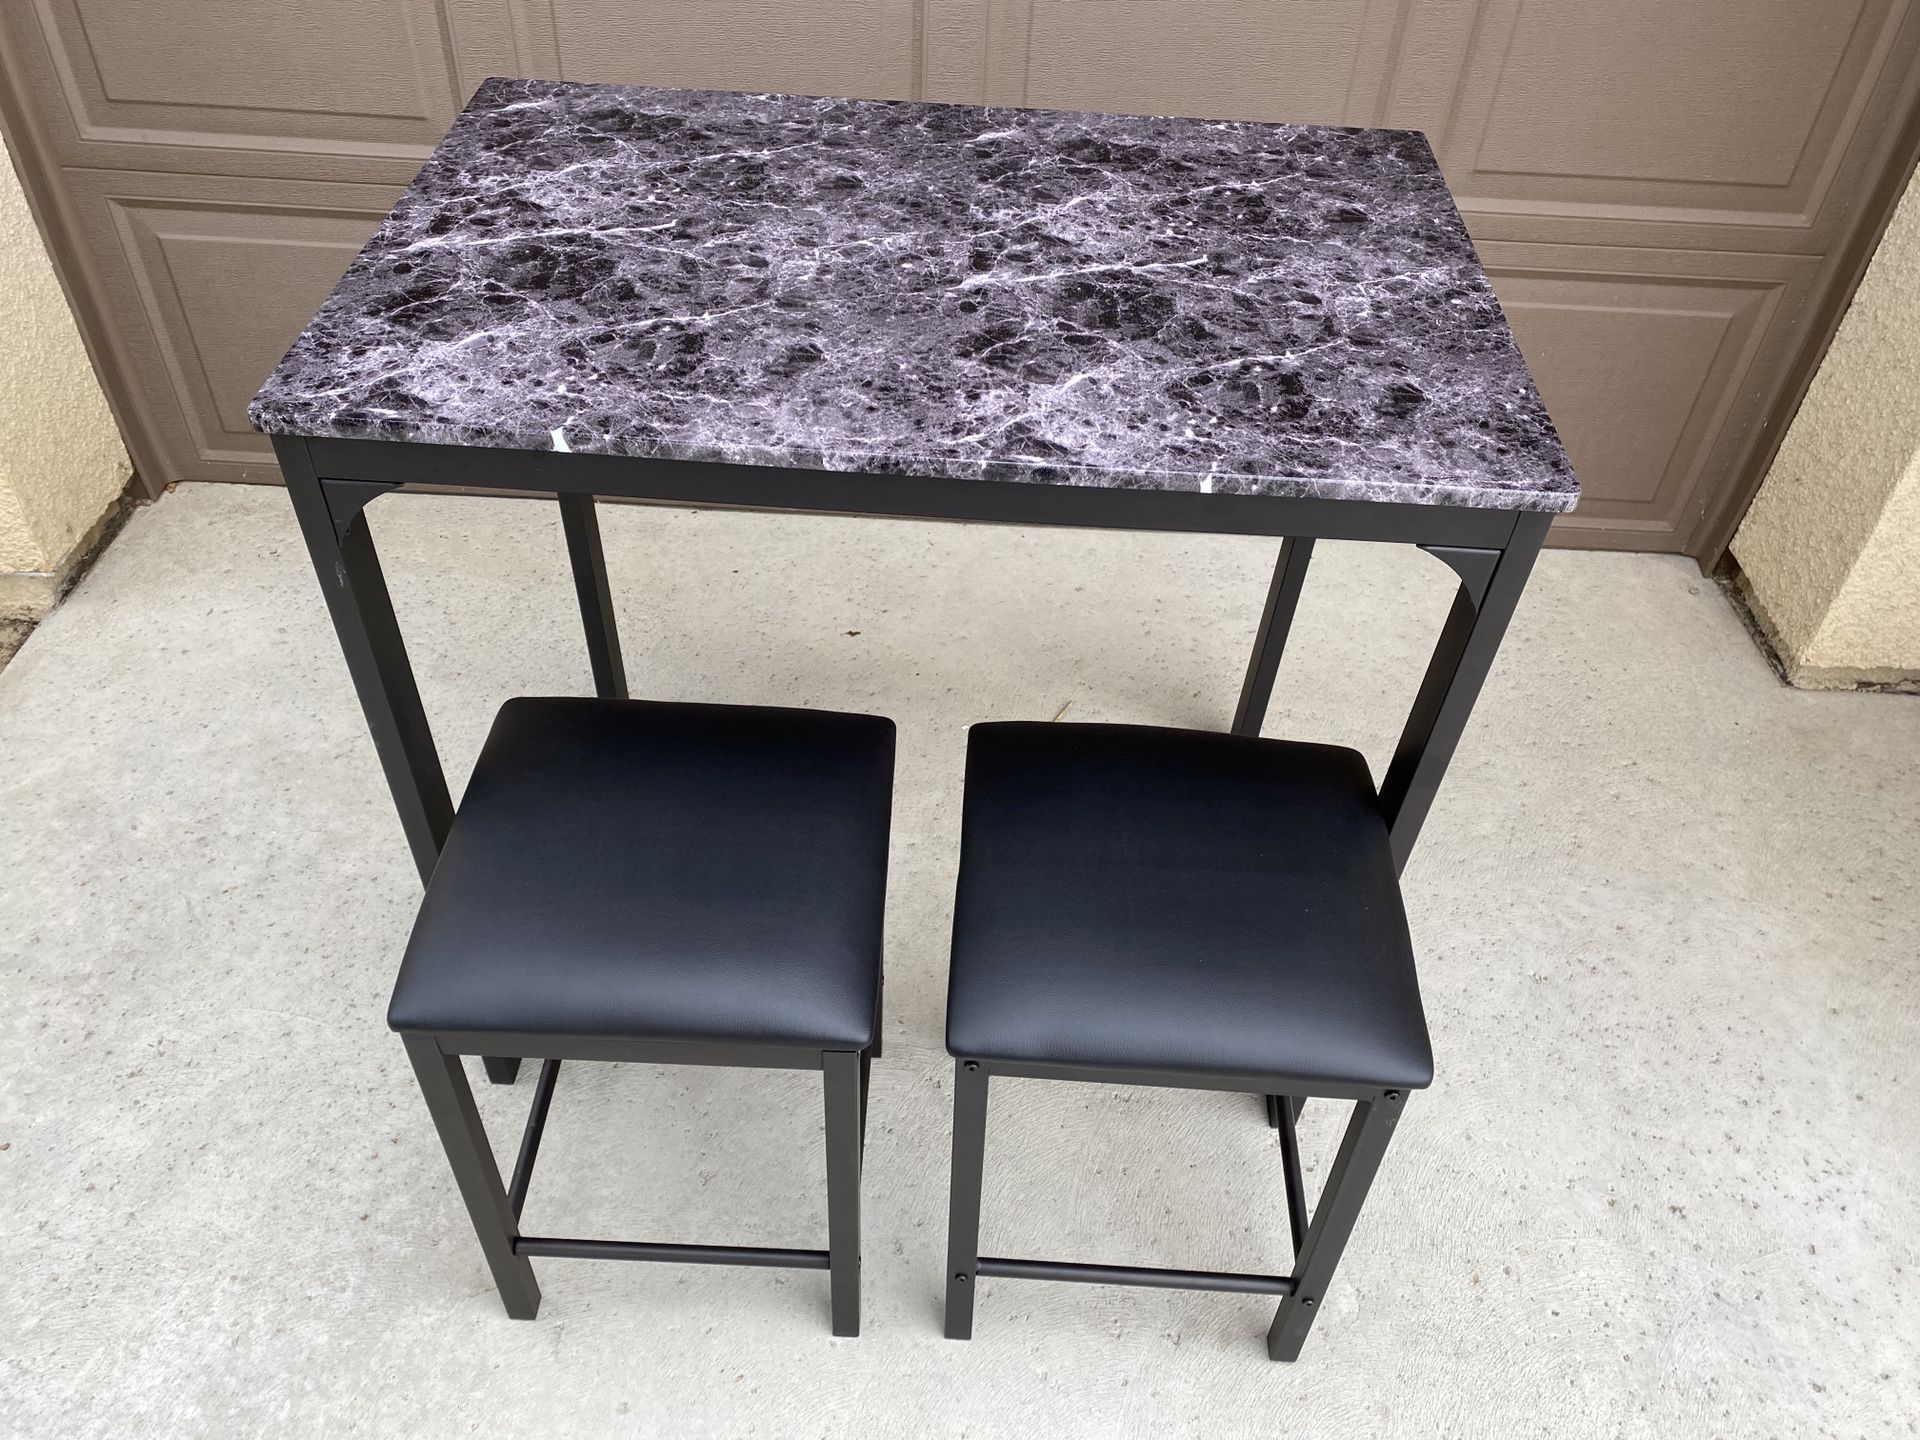 3 pcs Counter Height Dining Set - Faux Marble Table